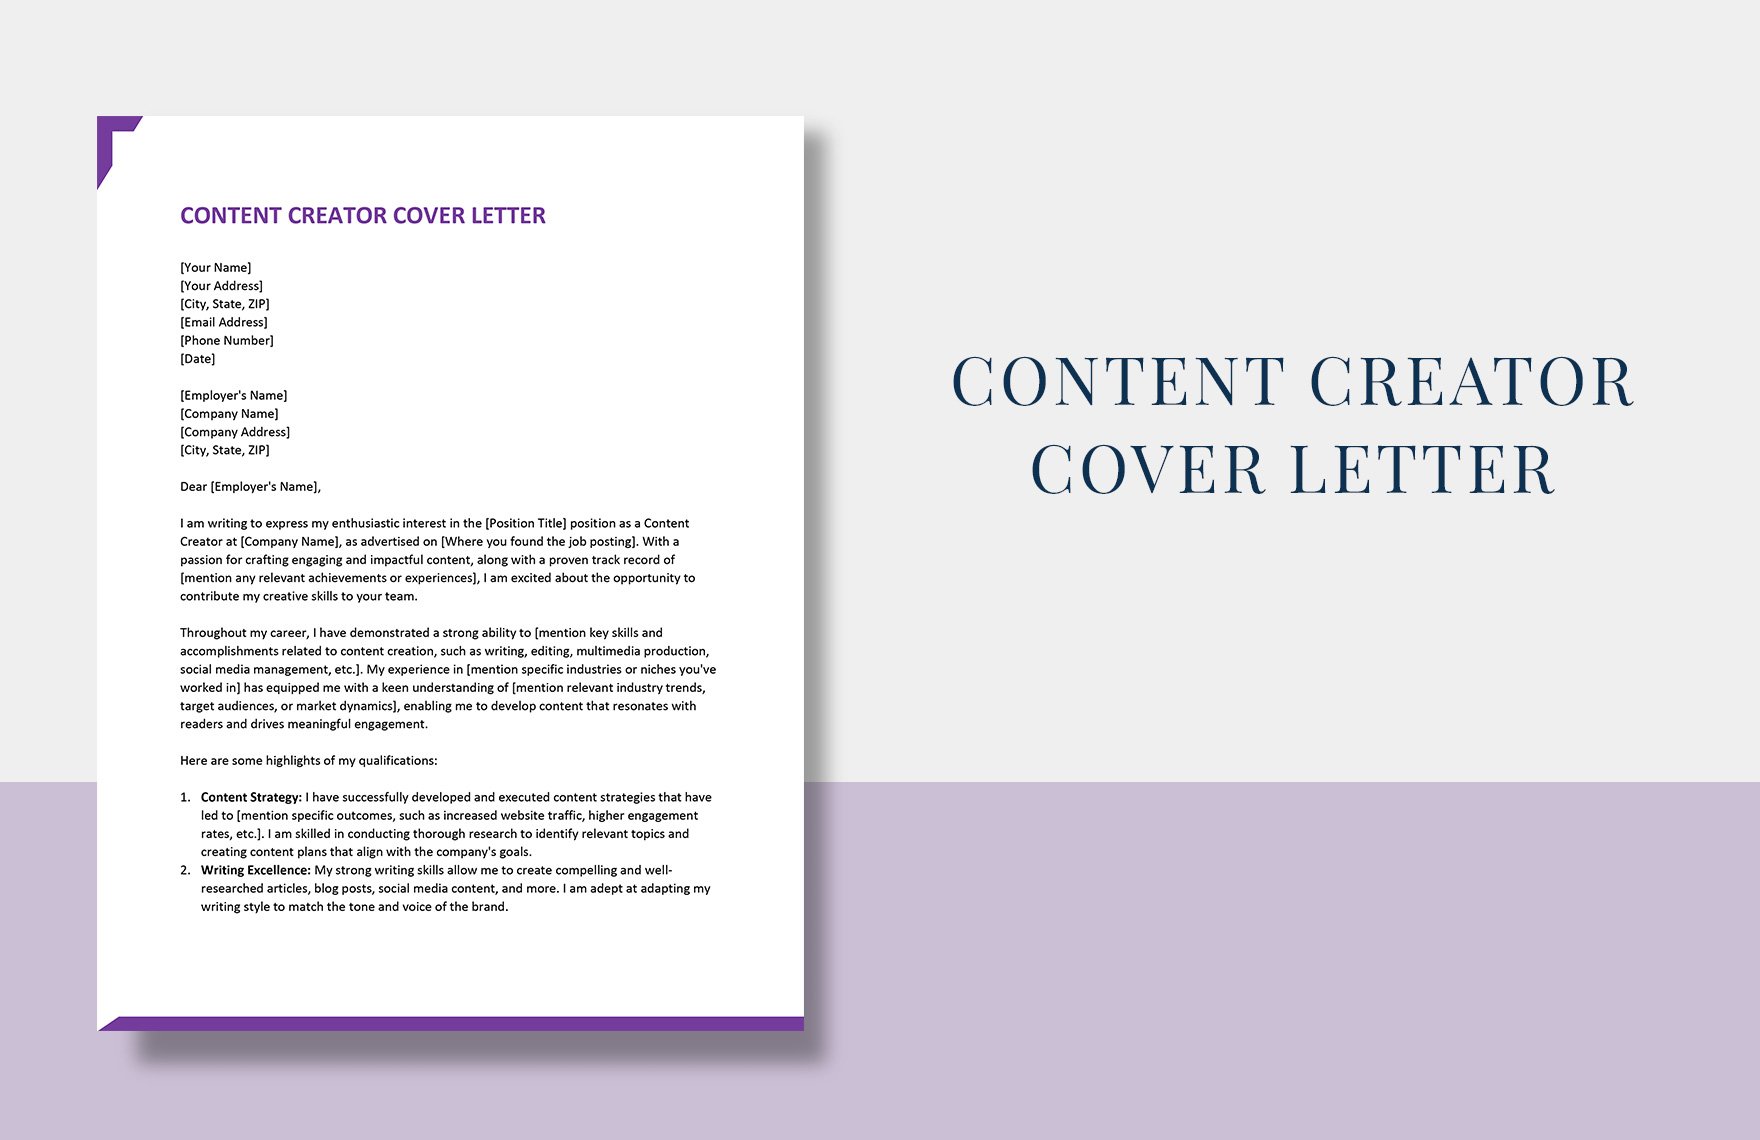 Content Creator Cover Letter in Word, Google Docs, Apple Pages